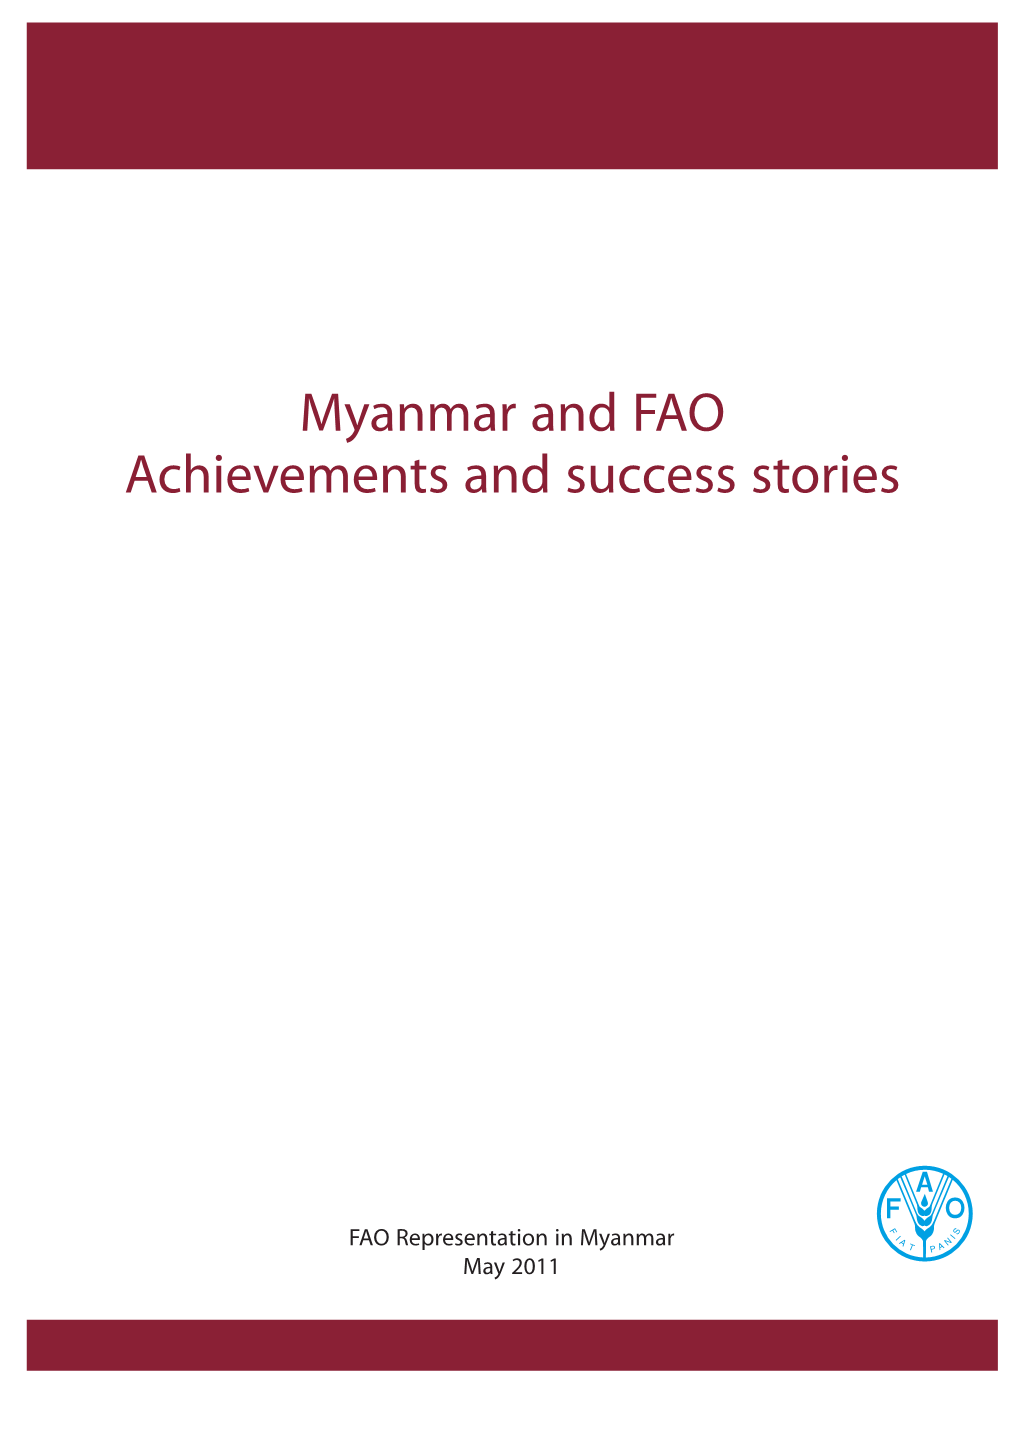 Myanmar and FAO Achievements and Success Stories